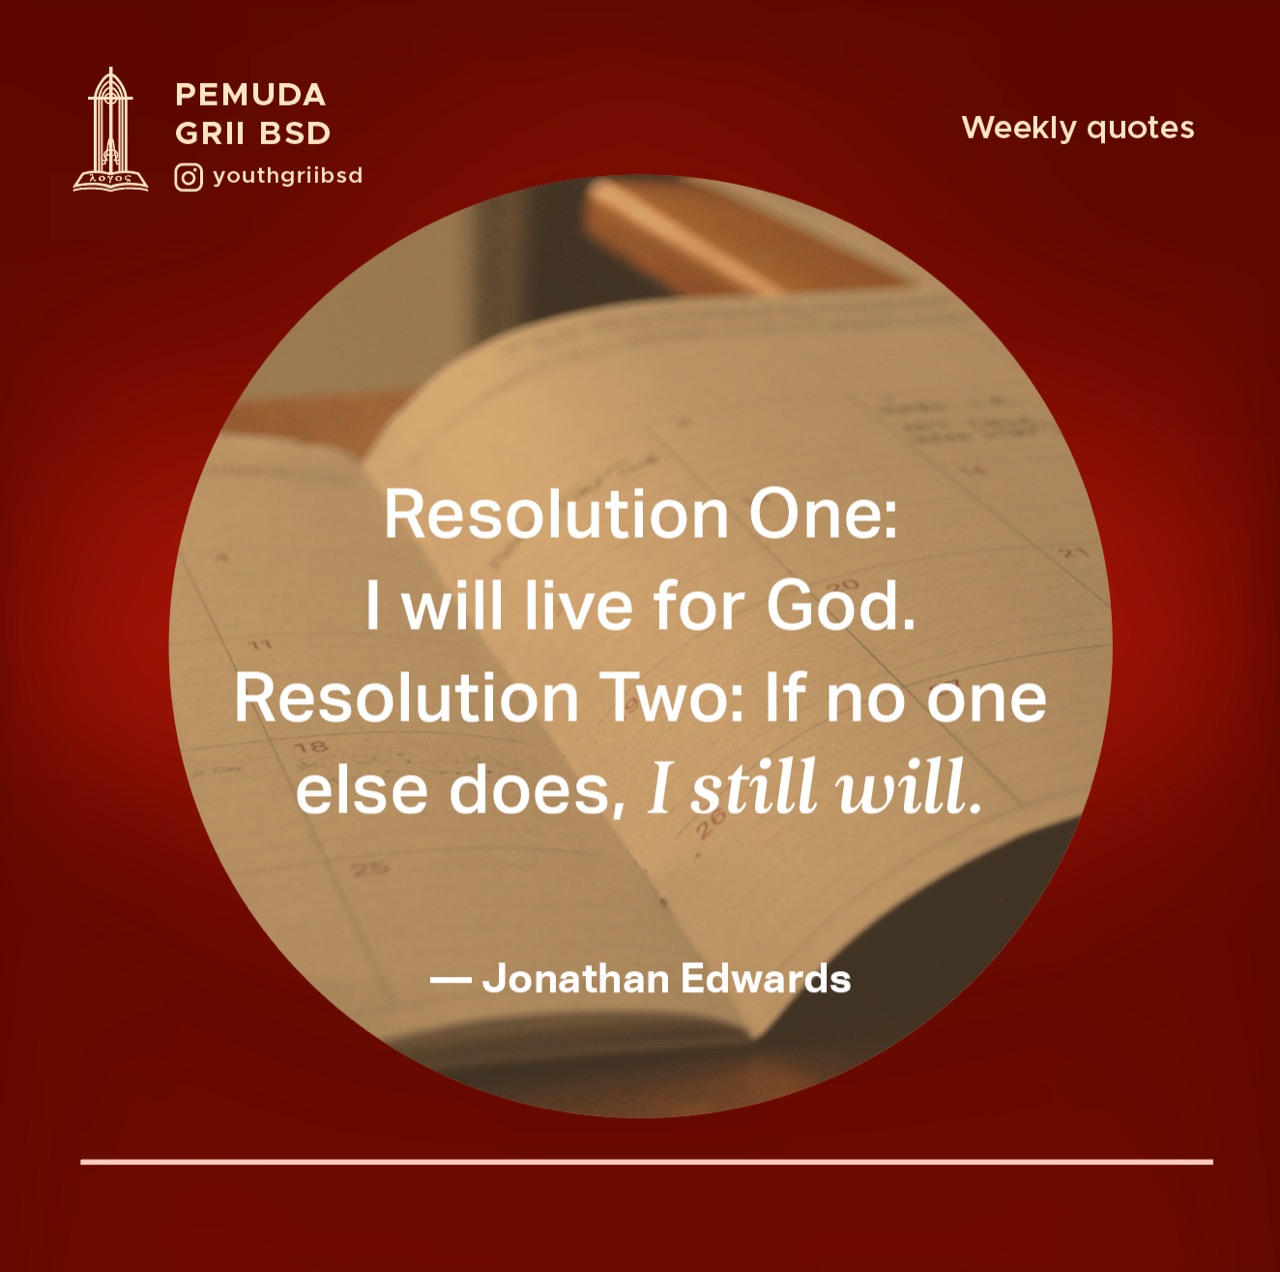 Resolution One: I will live fo God. Resolution Two: If no one else does, I still will.